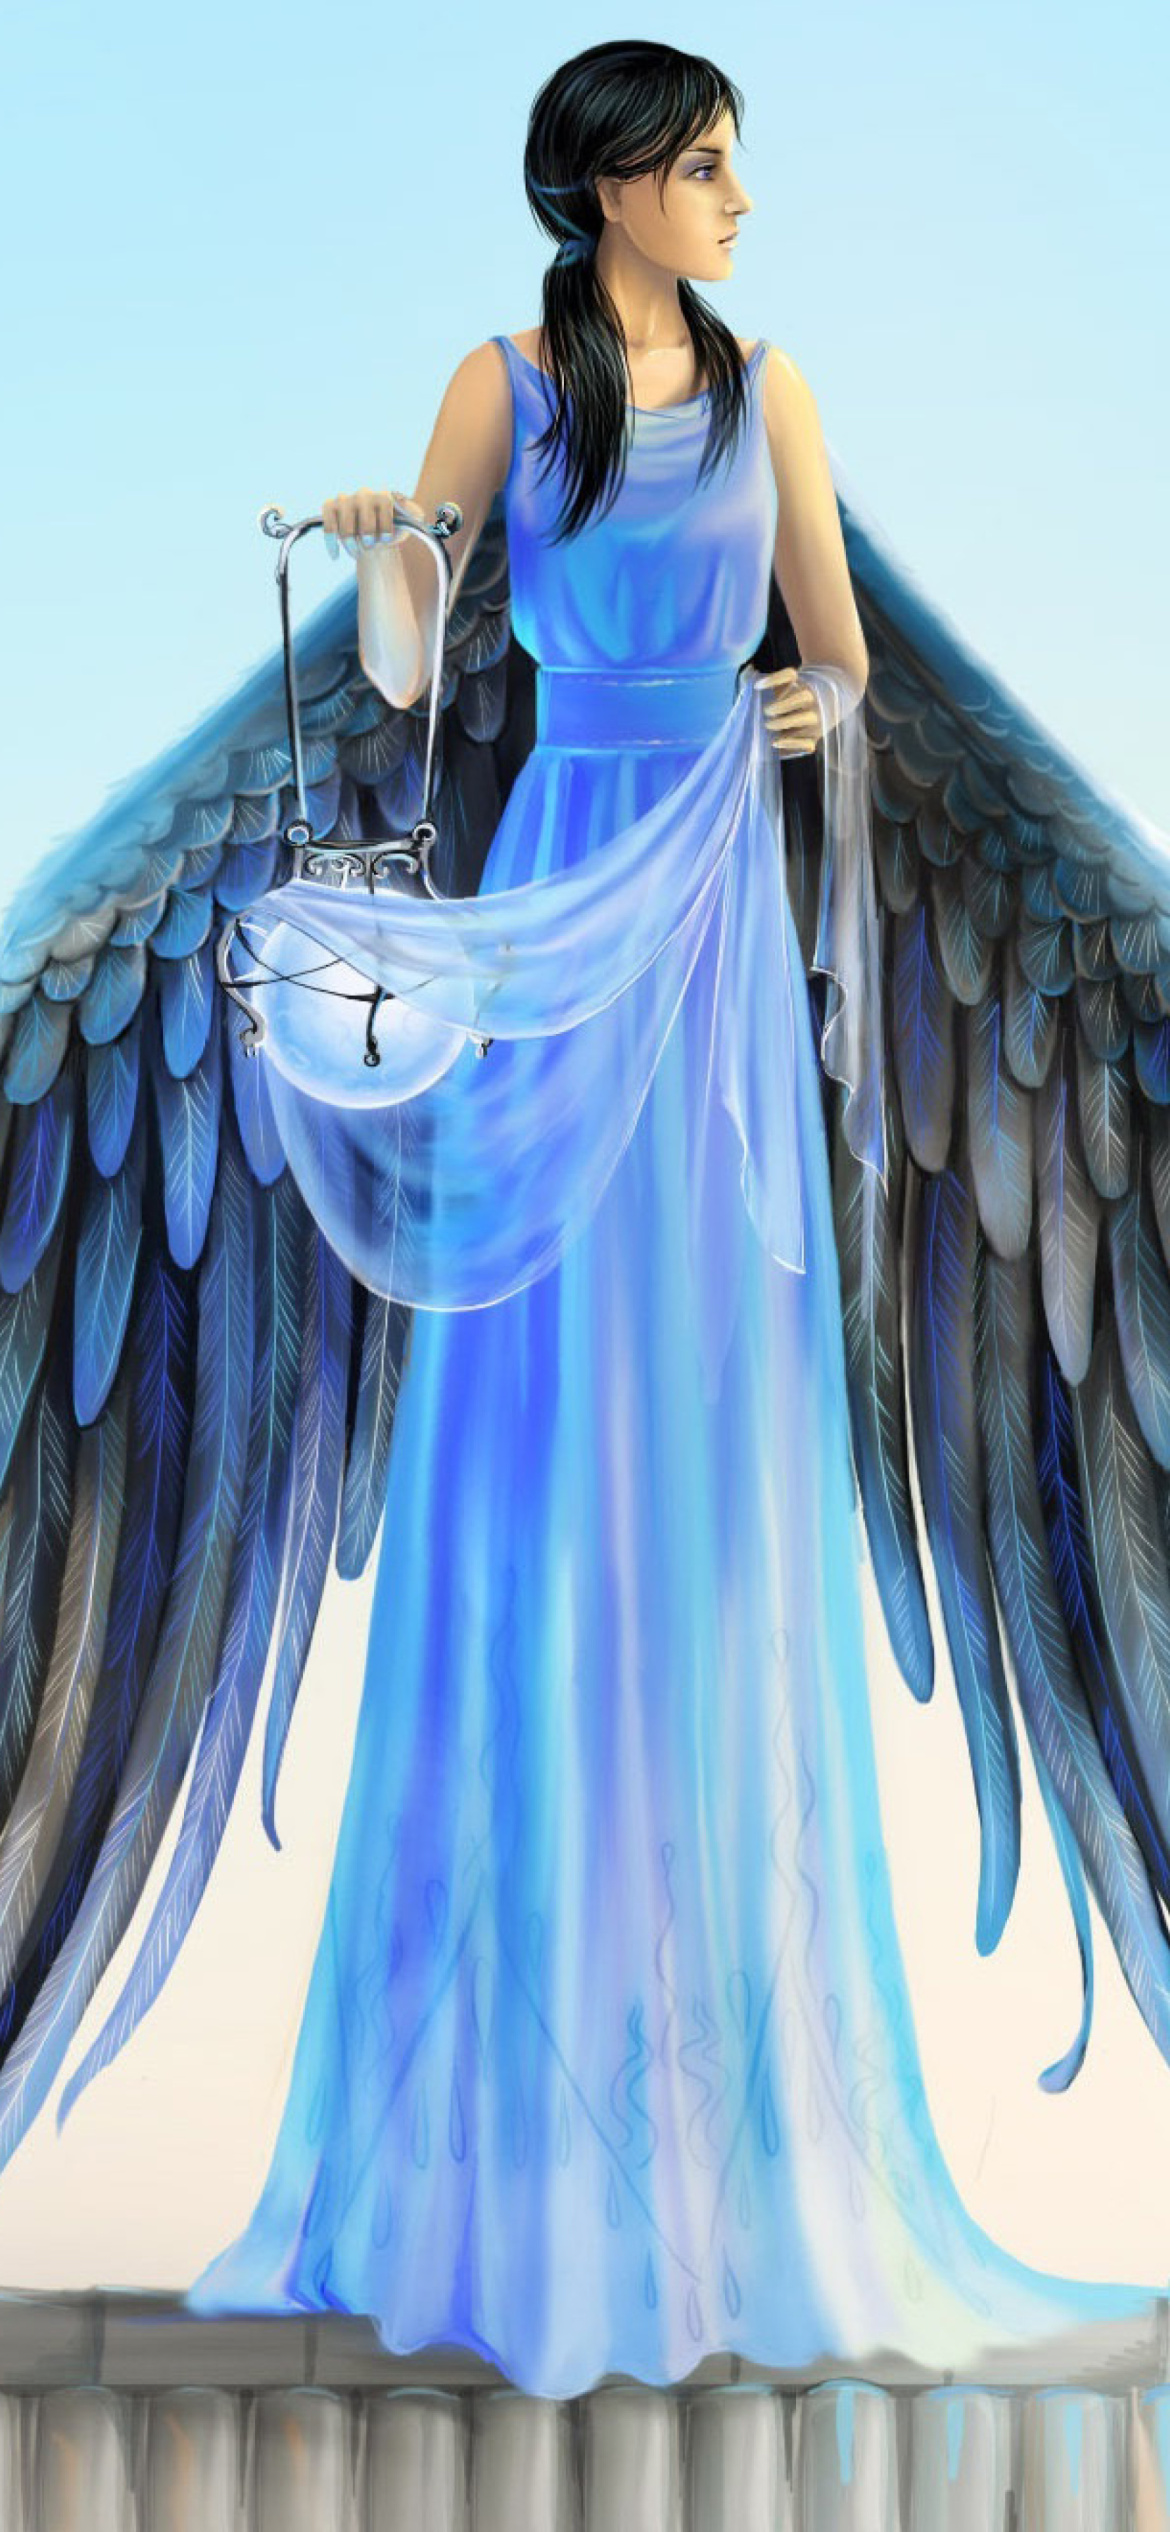 Angel with Wings wallpaper 1170x2532